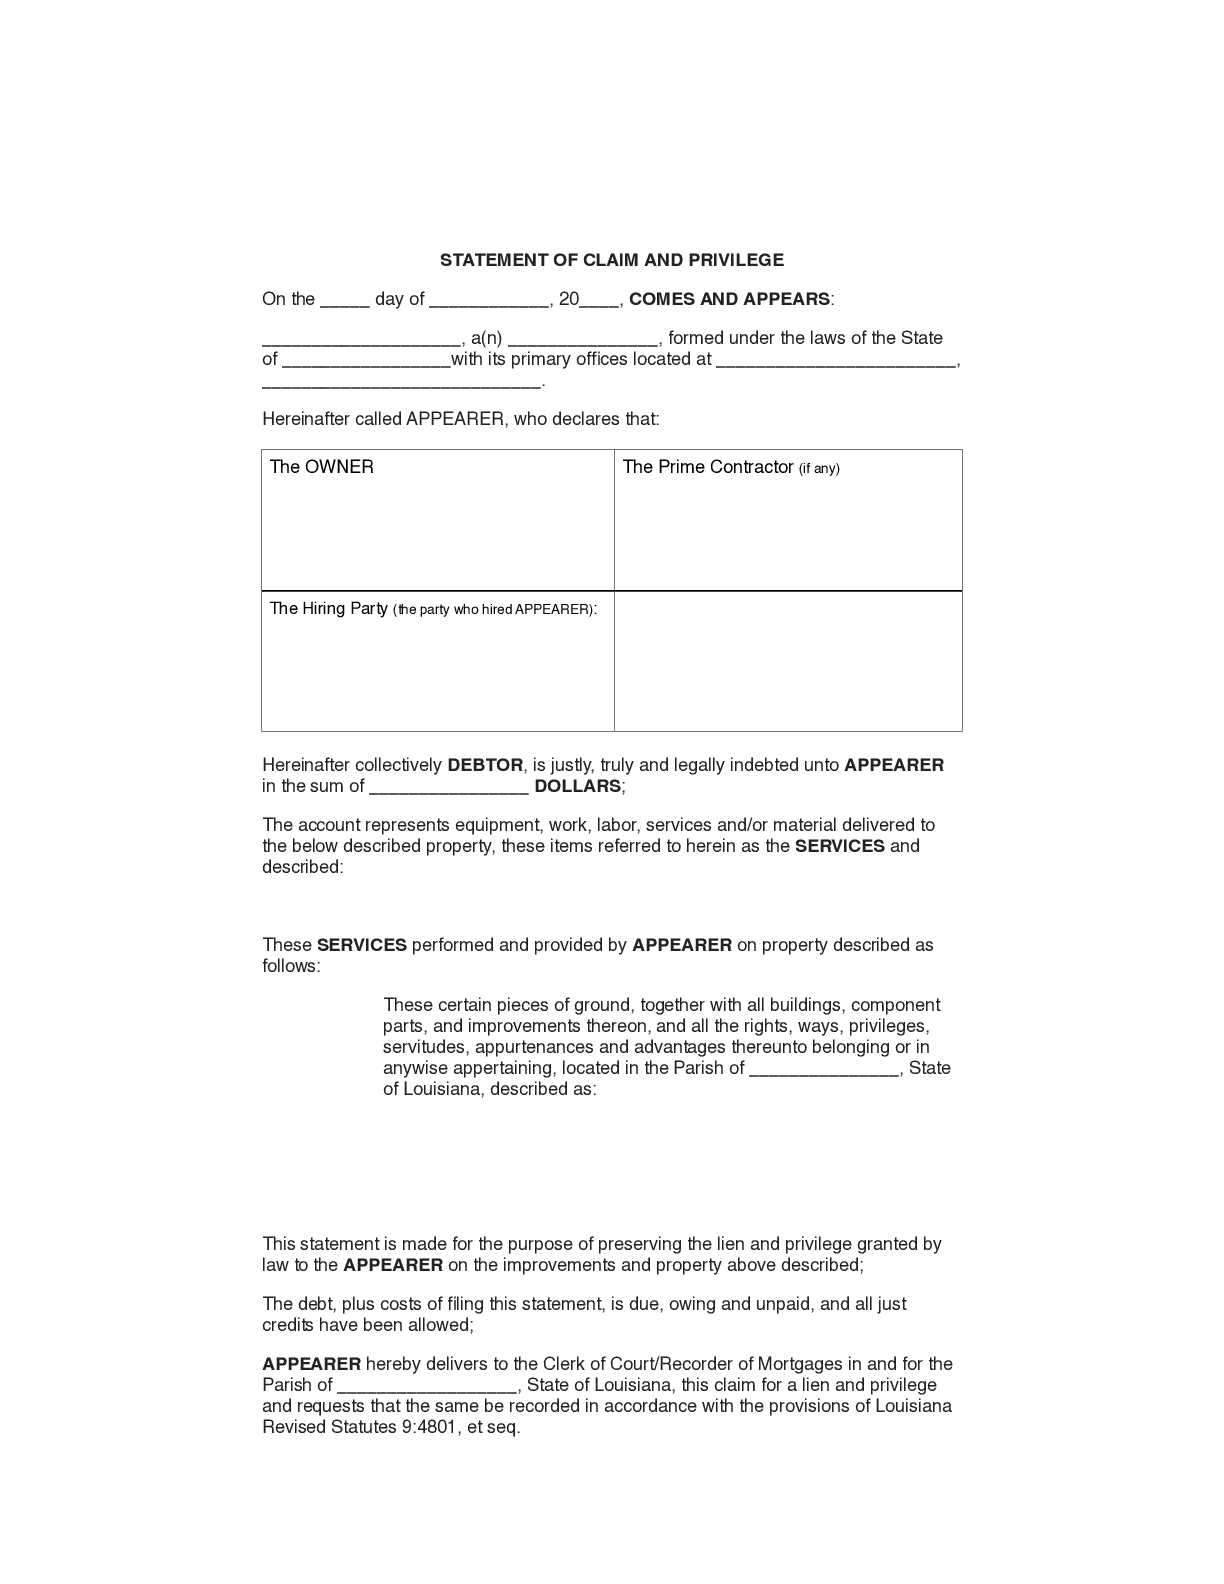 Louisiana Statement of Claim and Privilege Form - free from